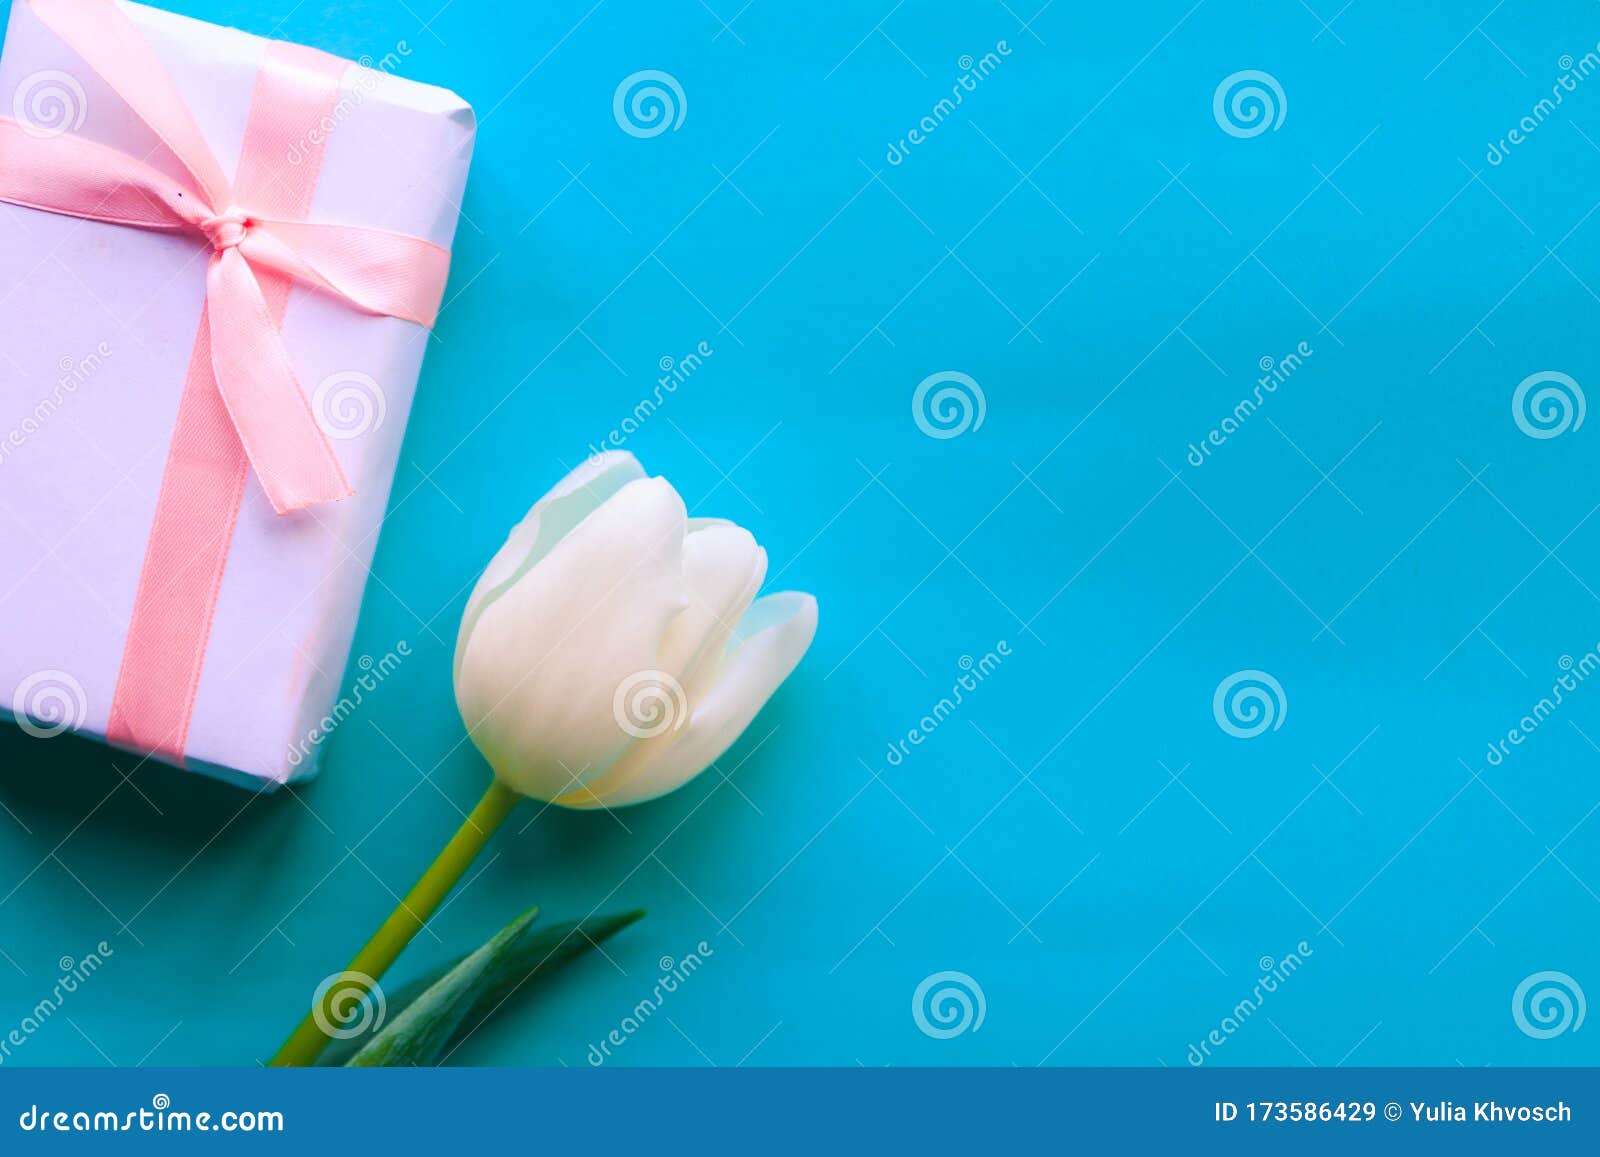 Gift Box And White Tulip On Bright Blue Background Stock